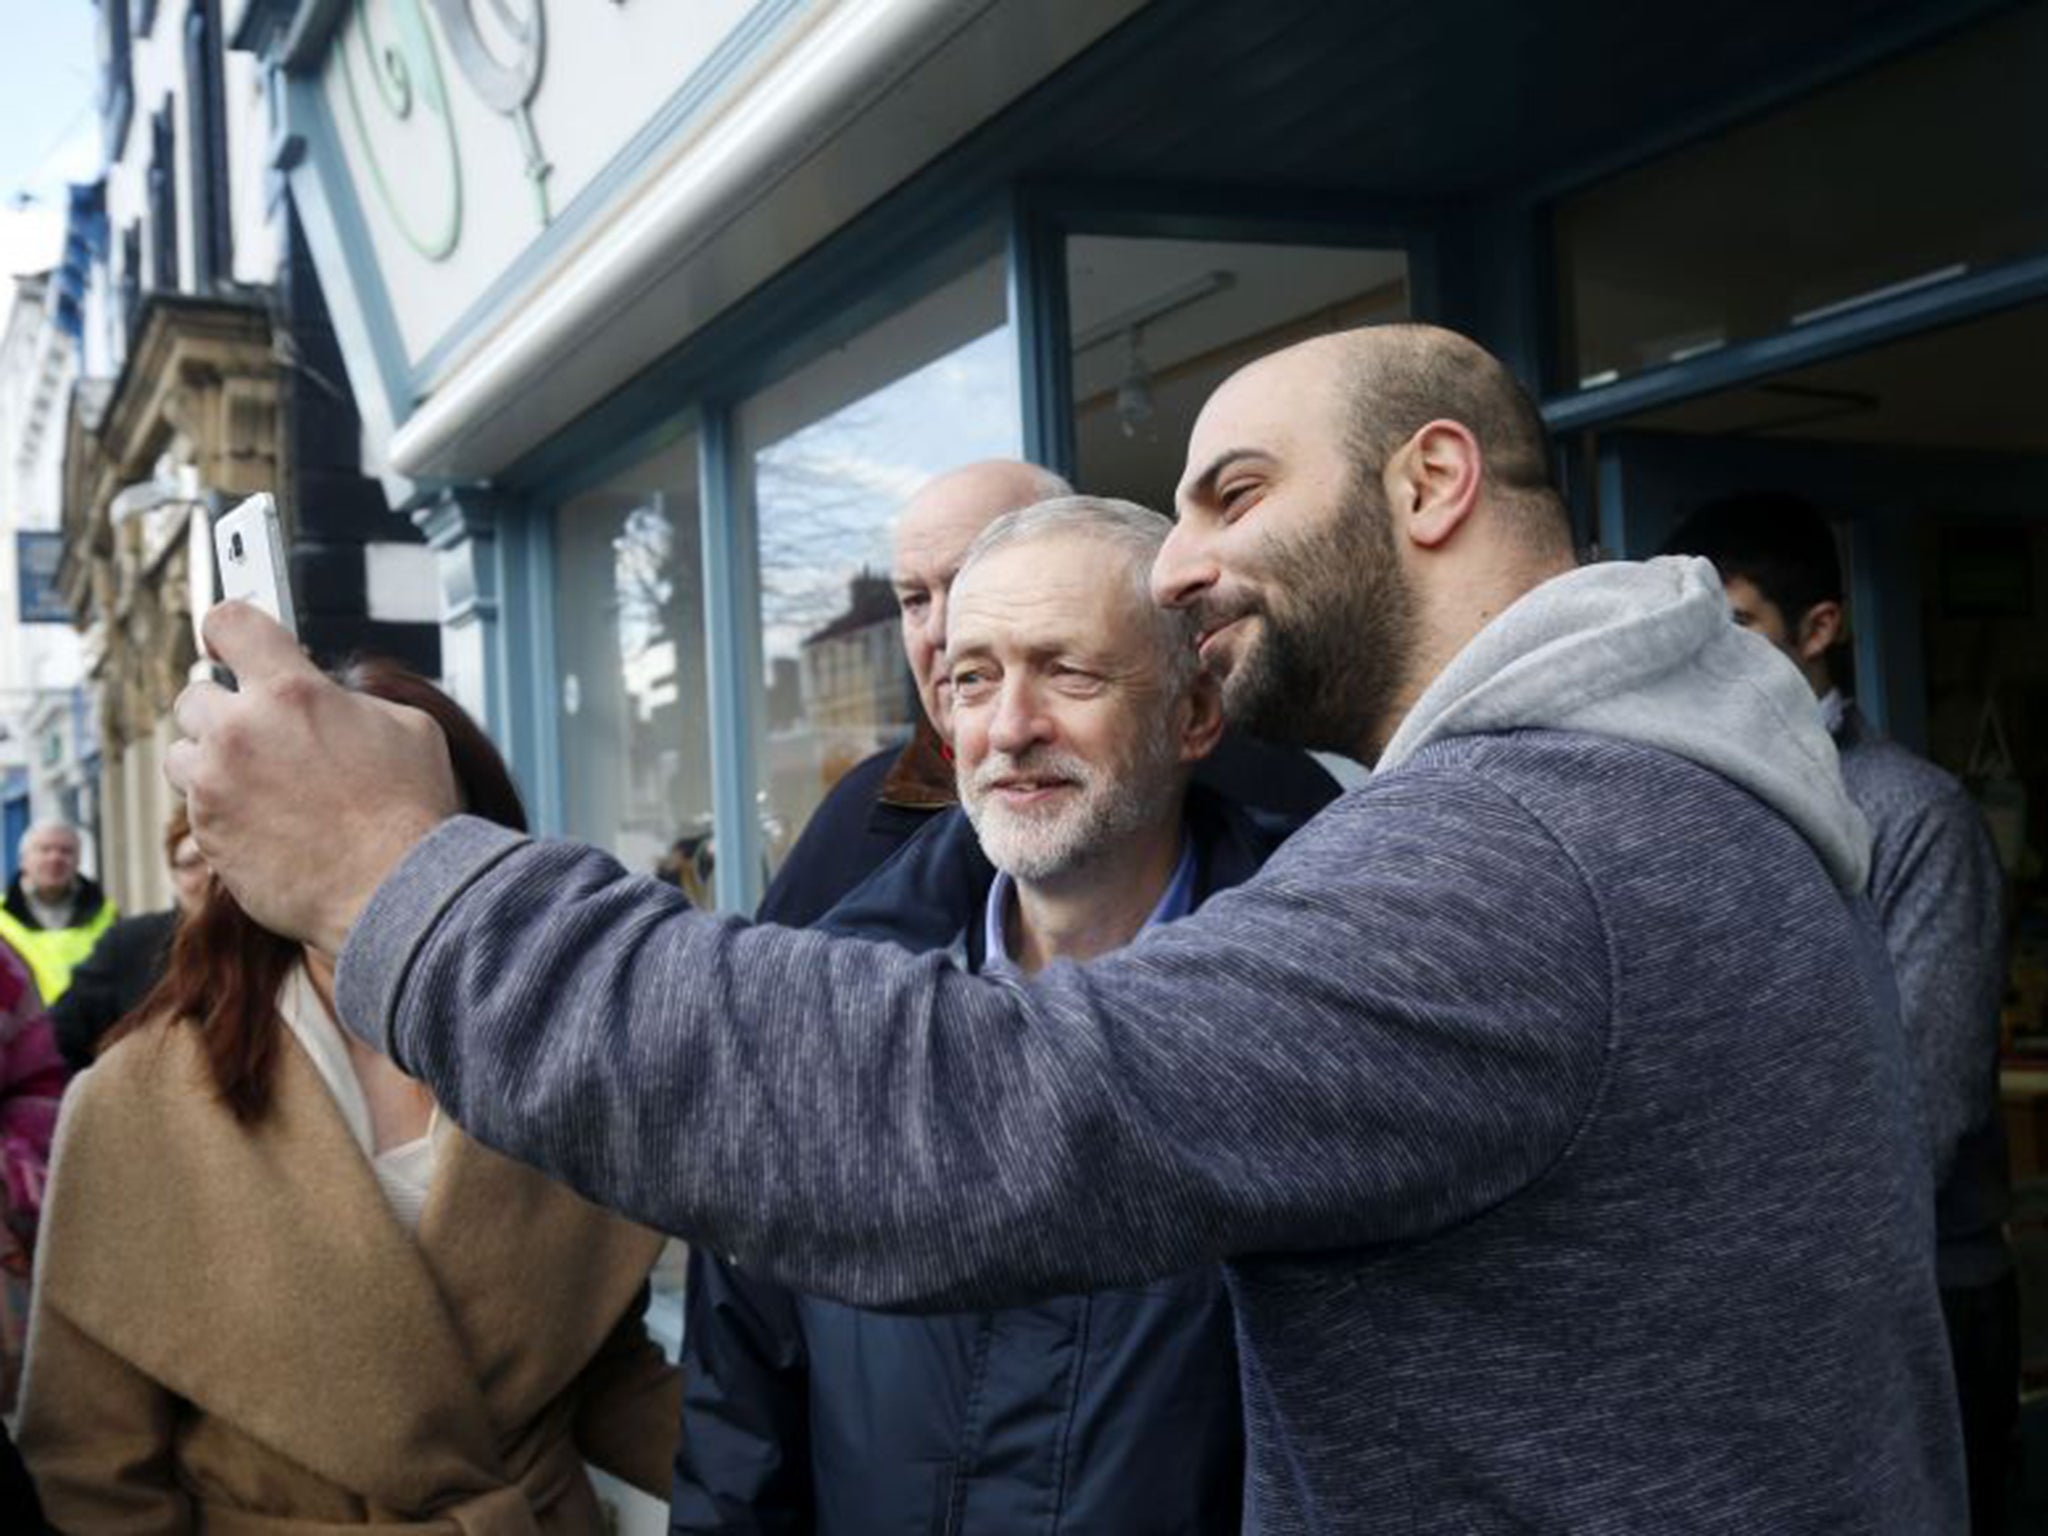 Cumbrians showed last week how much Jeremy Corbyn’s style of leadership is appreciated by the public